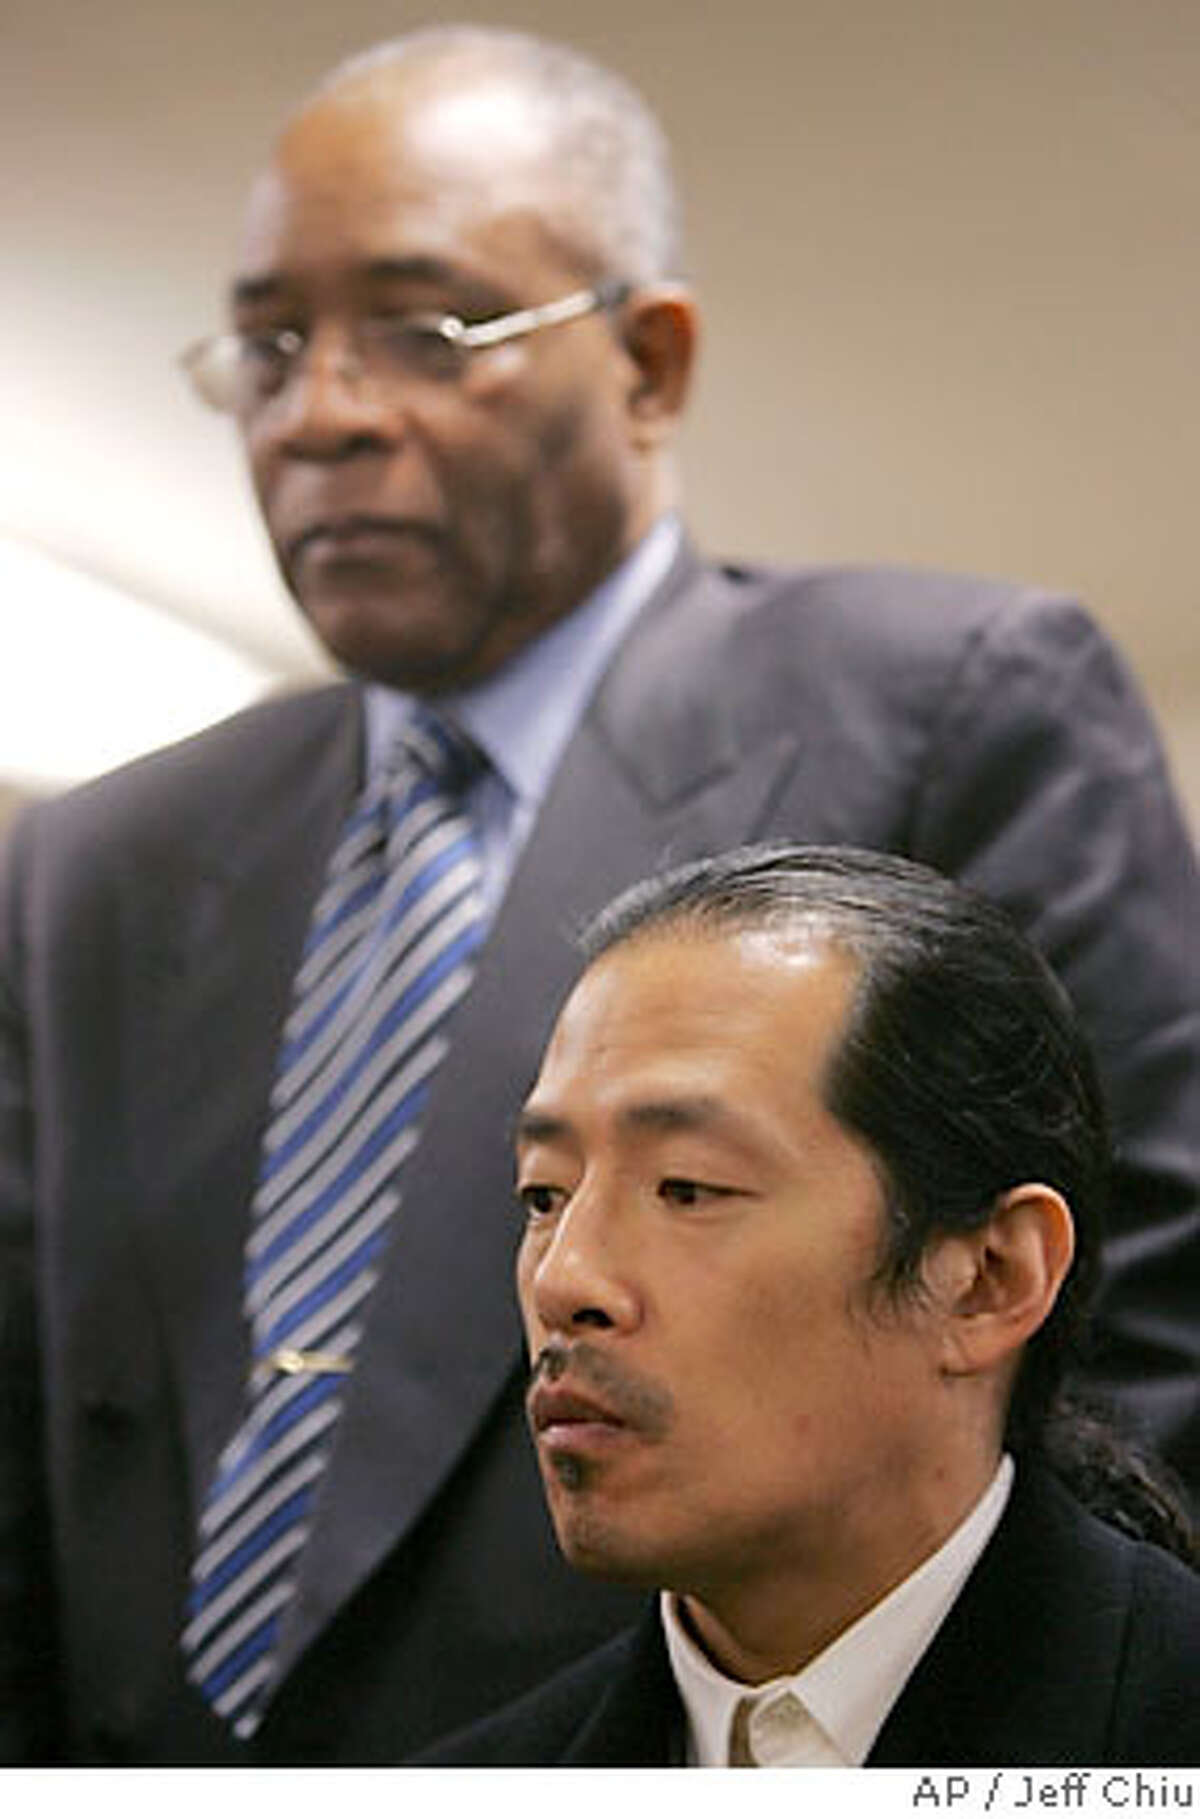 AsianWeek's editor-at-large Ted Fang, foreground, and Rev. Amos Brown, listen to a speaker at a news conference in San Francisco, Wednesday, Feb. 28, 2007. An editor of the weekly newspaper calling itself ''The Voice of Asian America'' apologized and suspended a columnist after Asian-American and city leaders condemned an opinion piece titled ''Why I Hate Blacks.'' Fang called the decision to publish contributor Kenneth Eng's piece a ''mistake'' and held a news conference with NAACP leaders to discuss how the Asian and black communities ''can be different and yet get along and work together.'' (AP Photo/Jeff Chiu)